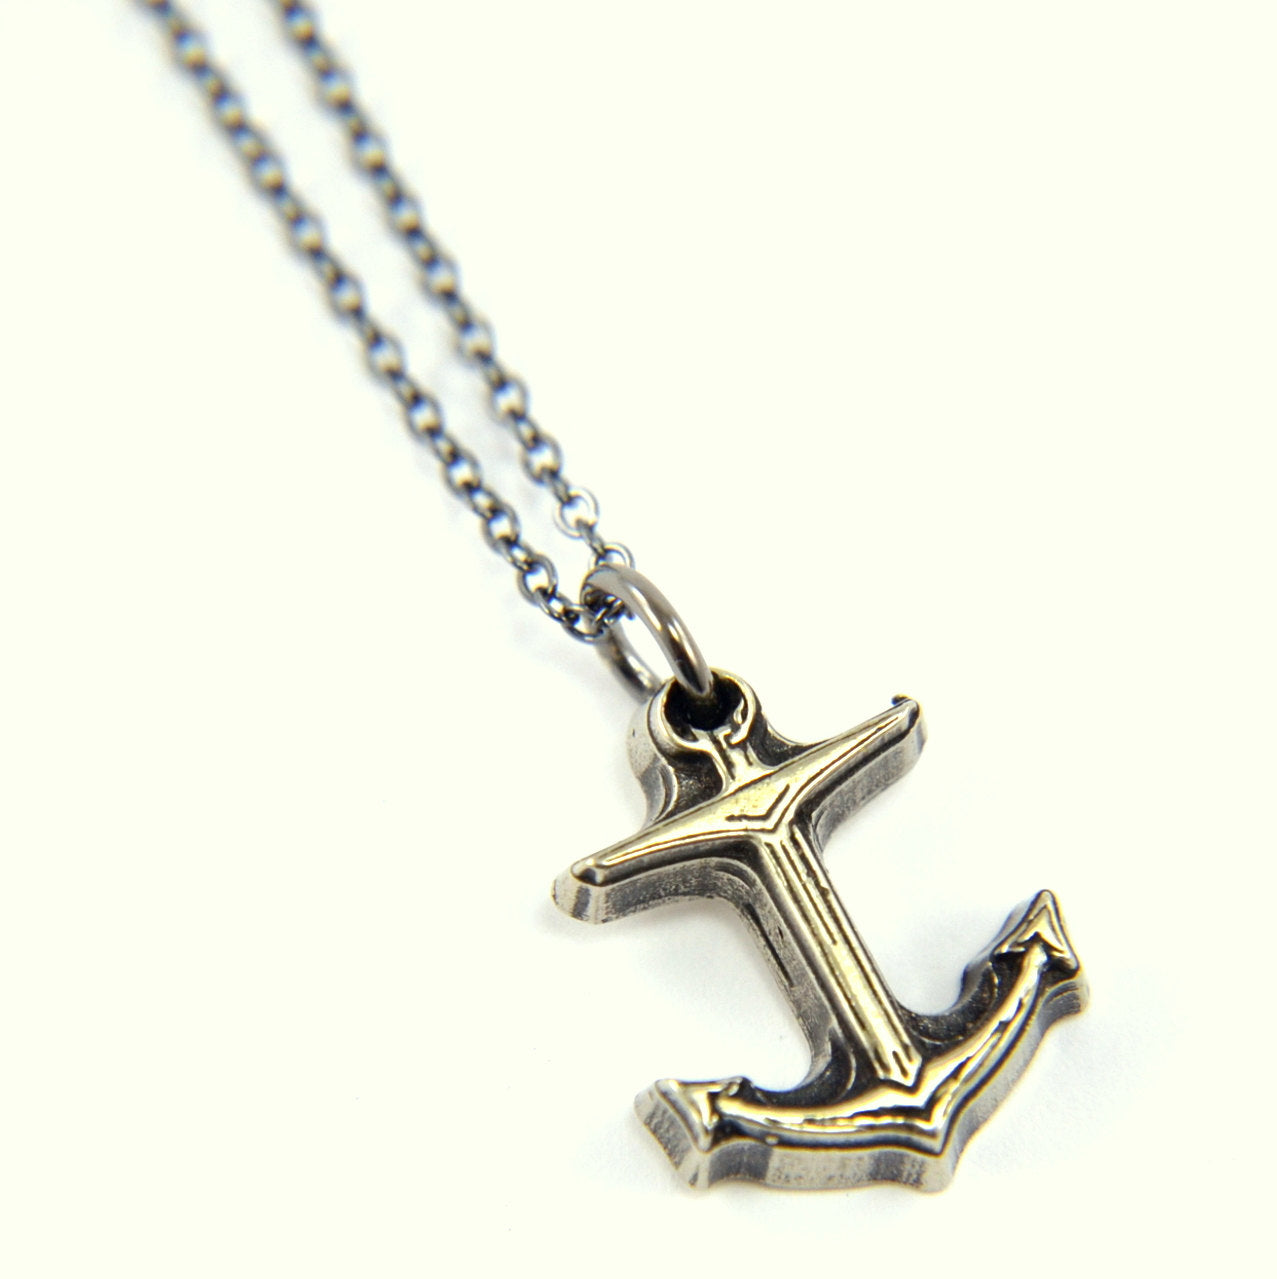 Tiny Anchor Necklace - Gwen Delicious Jewelry Designs